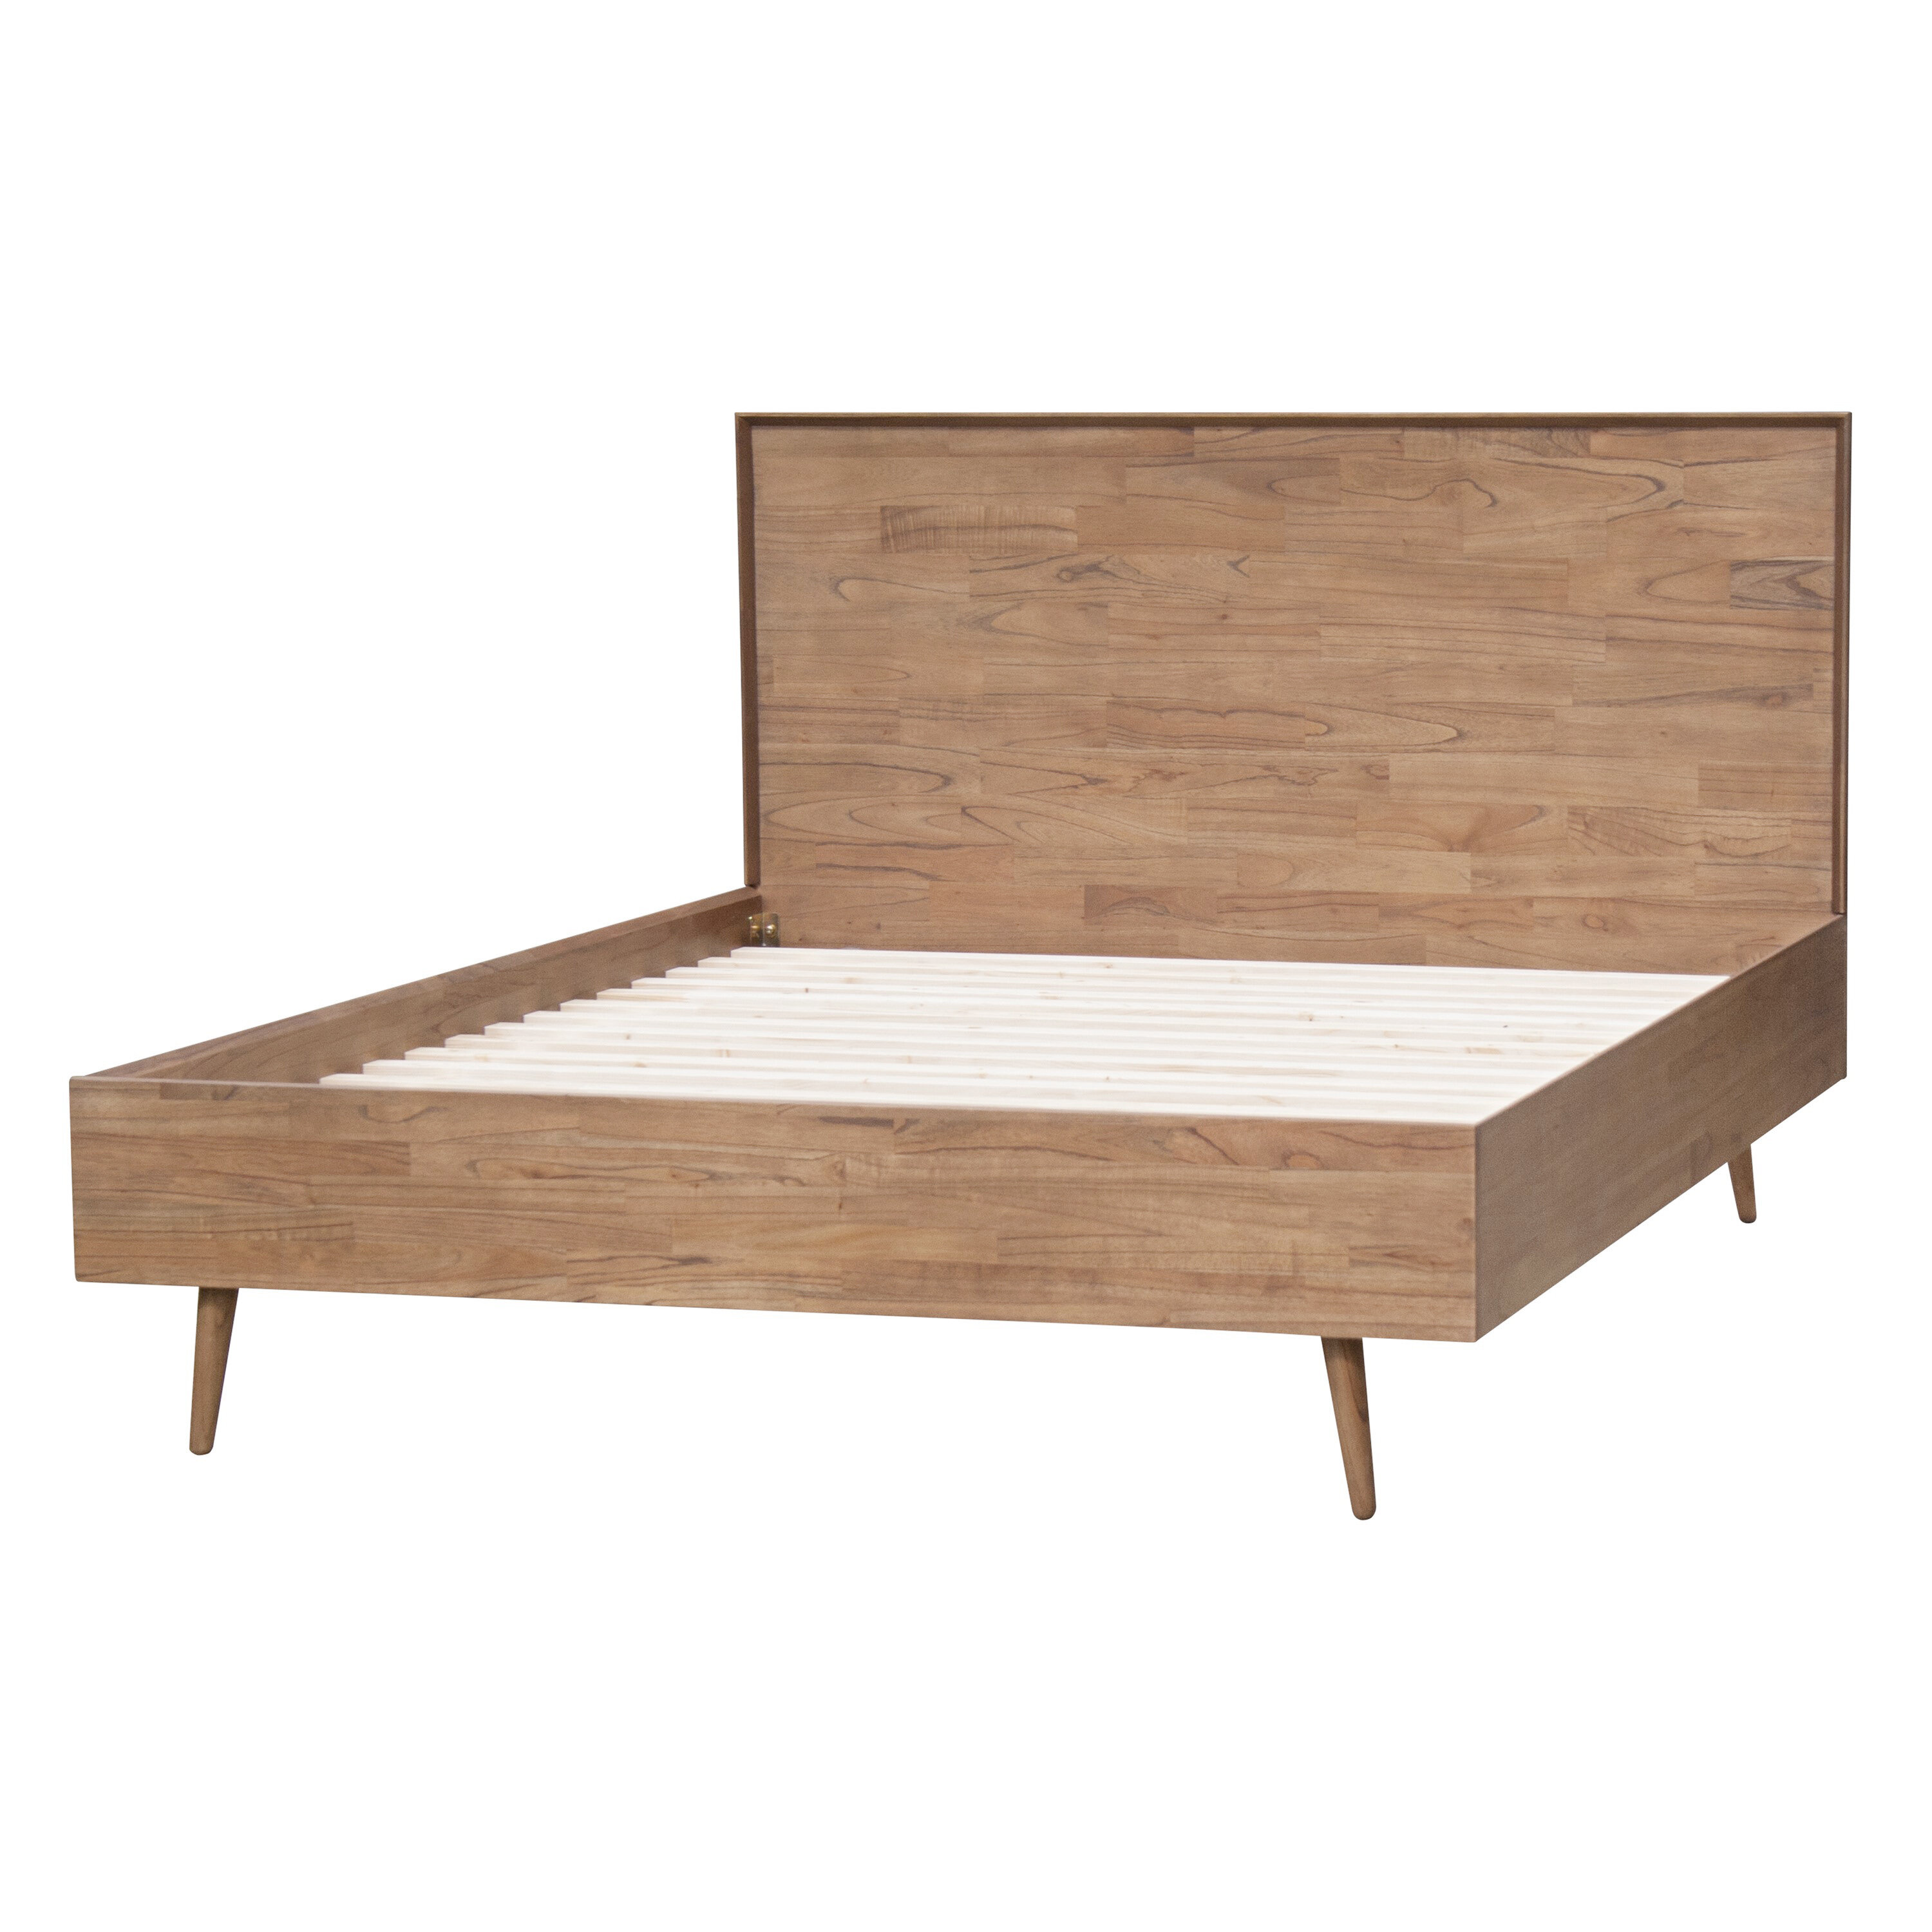 Featured image of post Wood Platform Bed Frame Queen Near Me / The price is super cheap because even though the bed can still be zinus smartbase deluxe queen sized bedframe in mint condition.